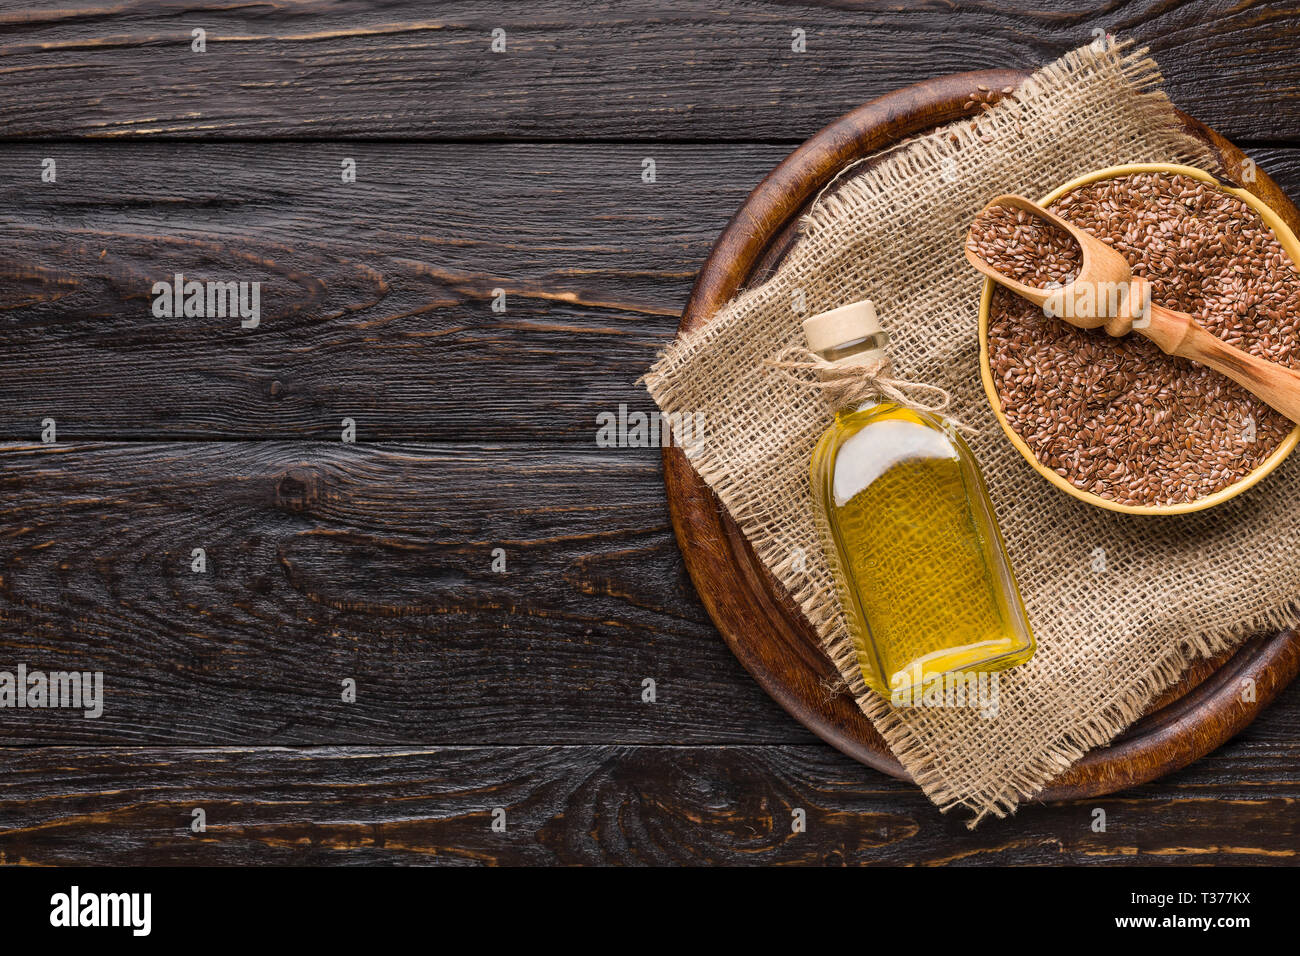 Linseed oil and bottle of linseeds on wooden background. Stock Photo